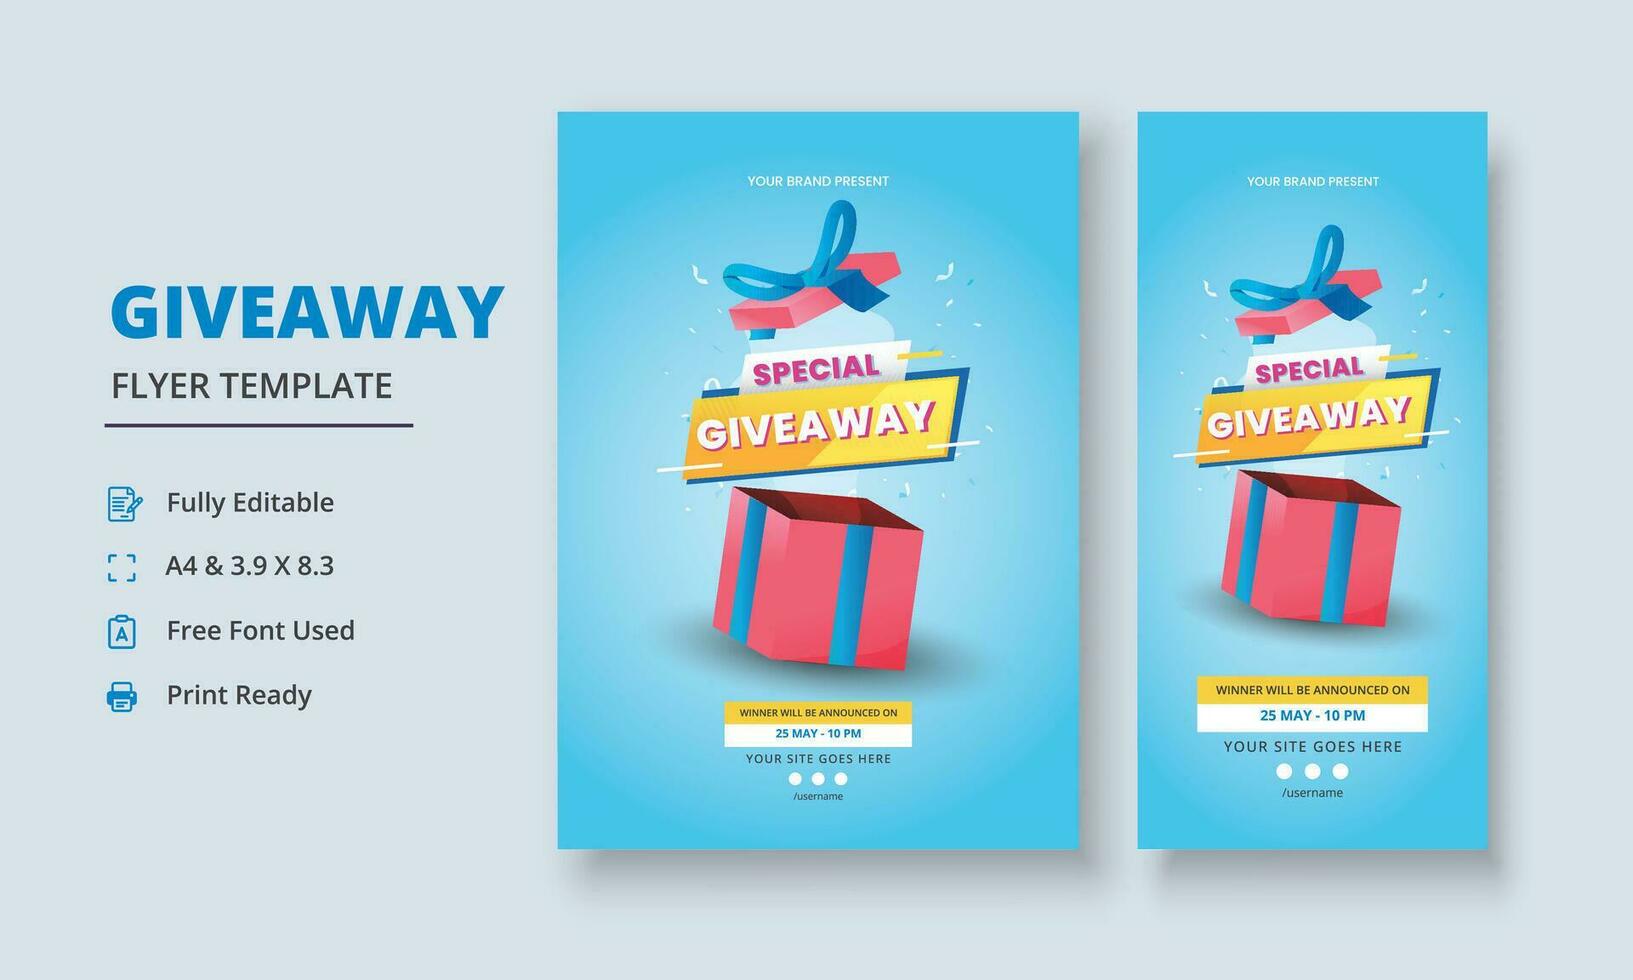 Giveaway Flyer Template, Giveaway Poster, Raffle Poster Design, Giveaway Template Design, Giveaway Invitation, Roll Up Banner vector